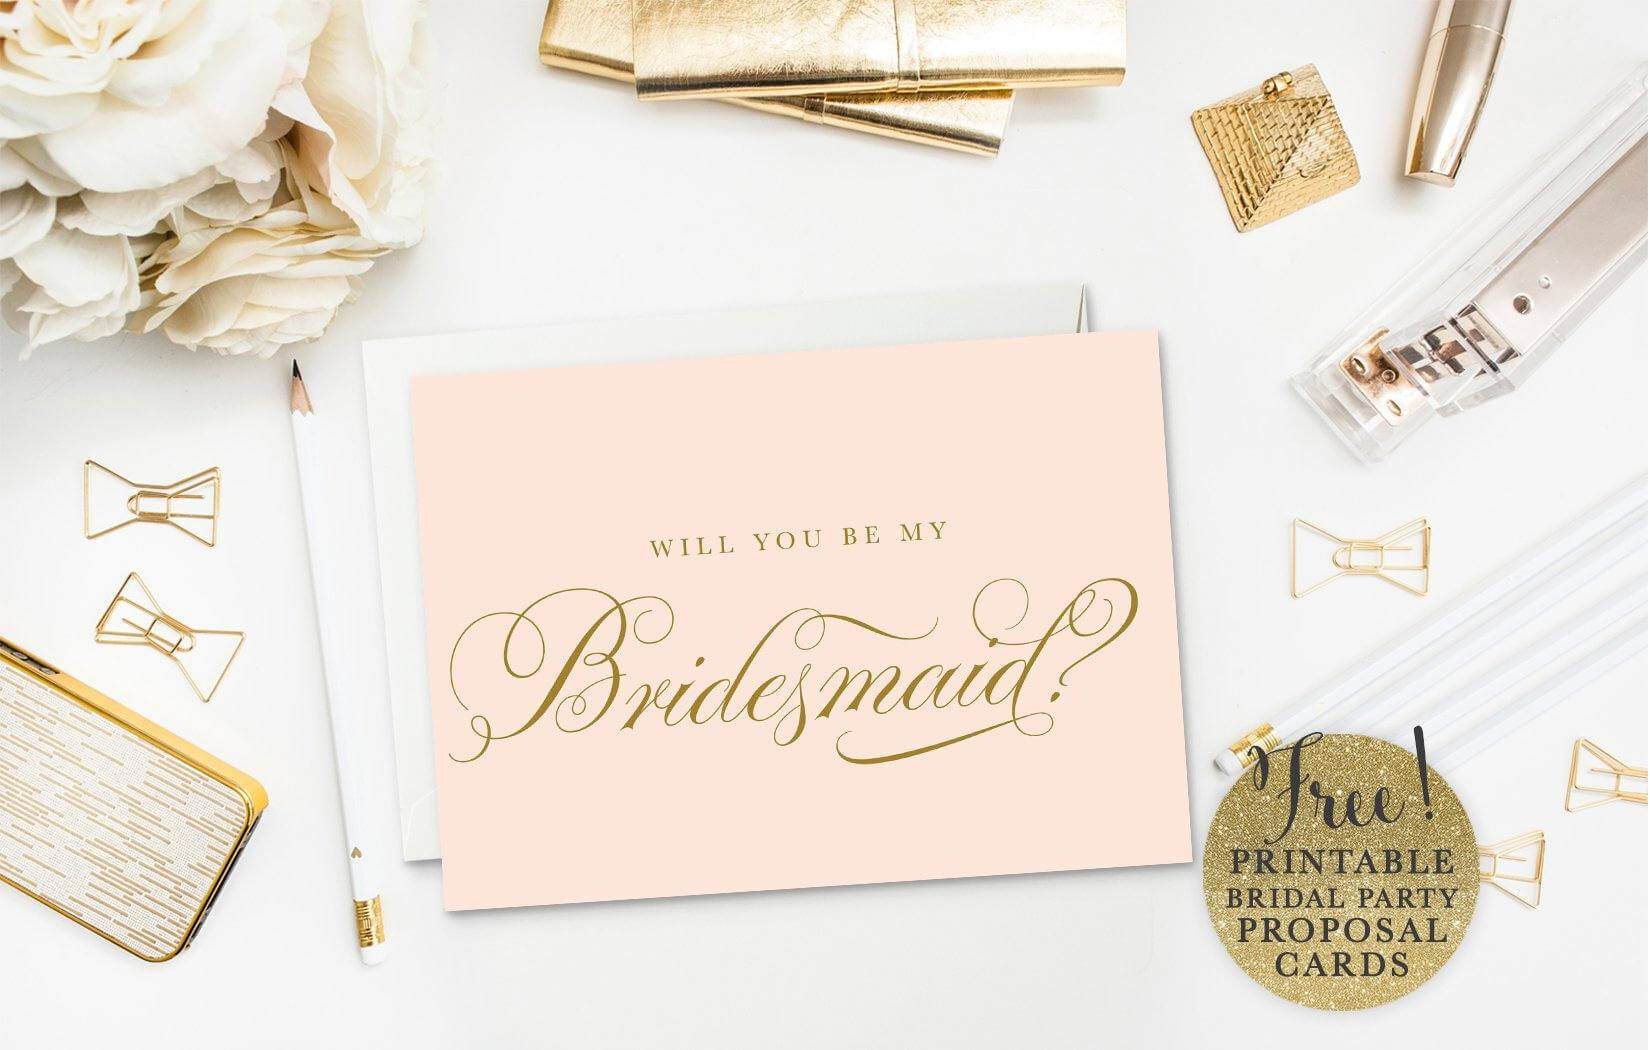 10 Will You Be My Bridesmaid? Cards (Free & Printable) Intended For Will You Be My Bridesmaid Card Template